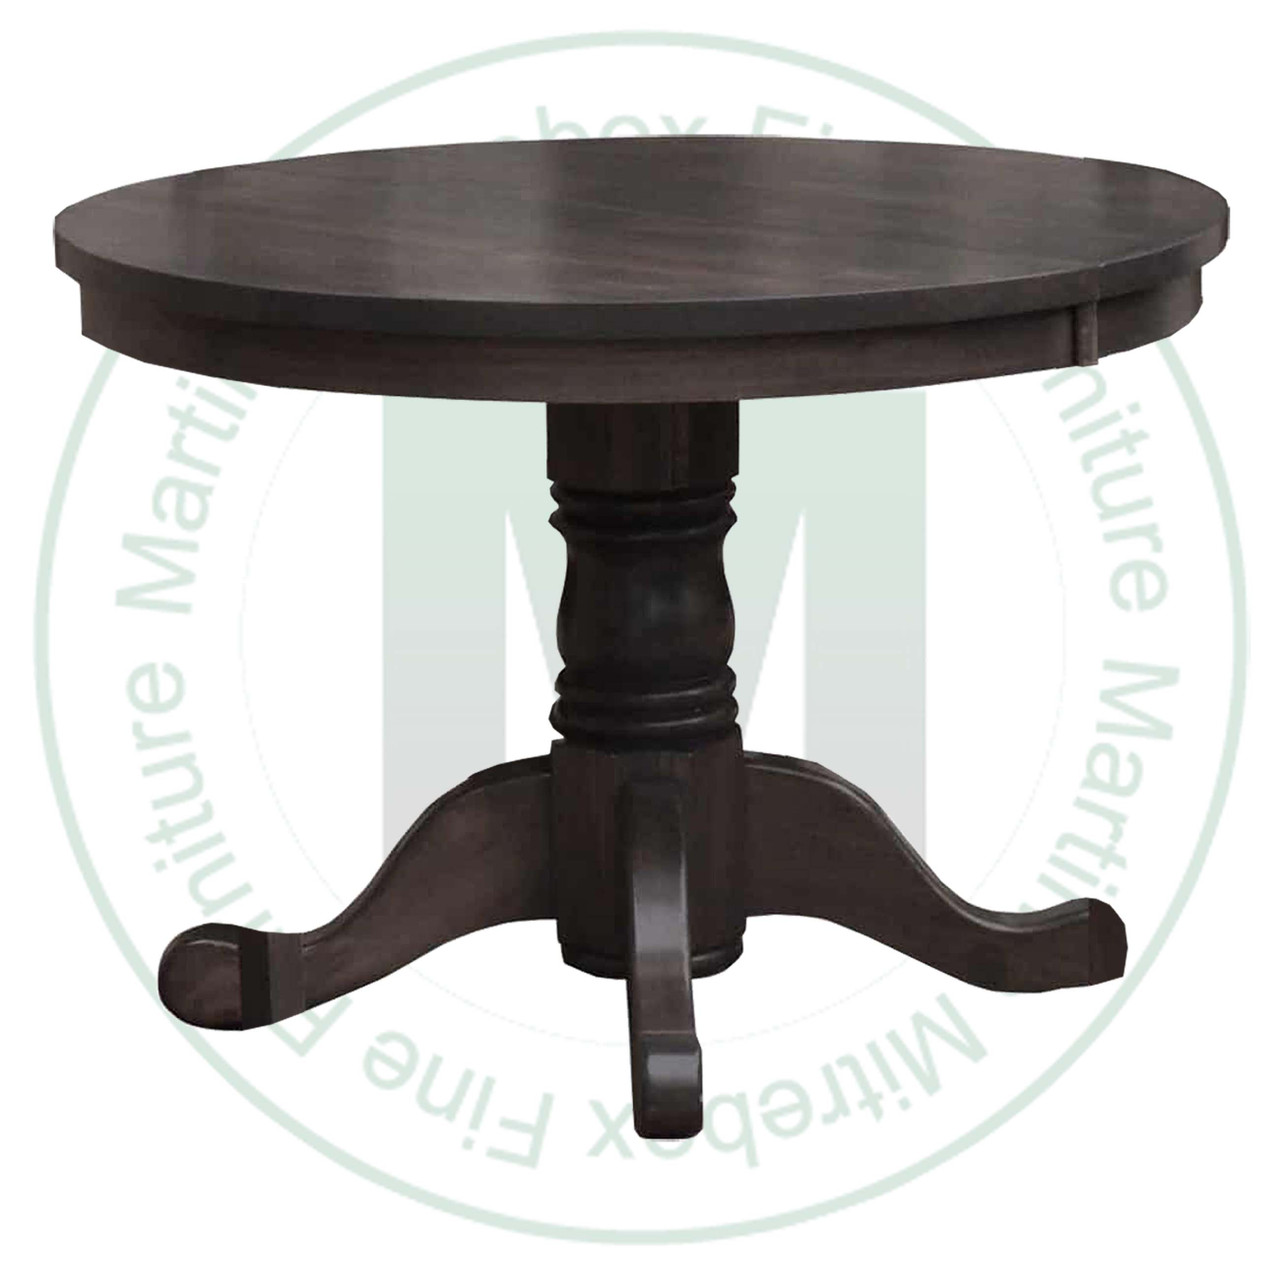 Oak Nith River Single Pedestal Round Solid Top Table 48''D x 48''W x 30''H With 10'' Pedestal